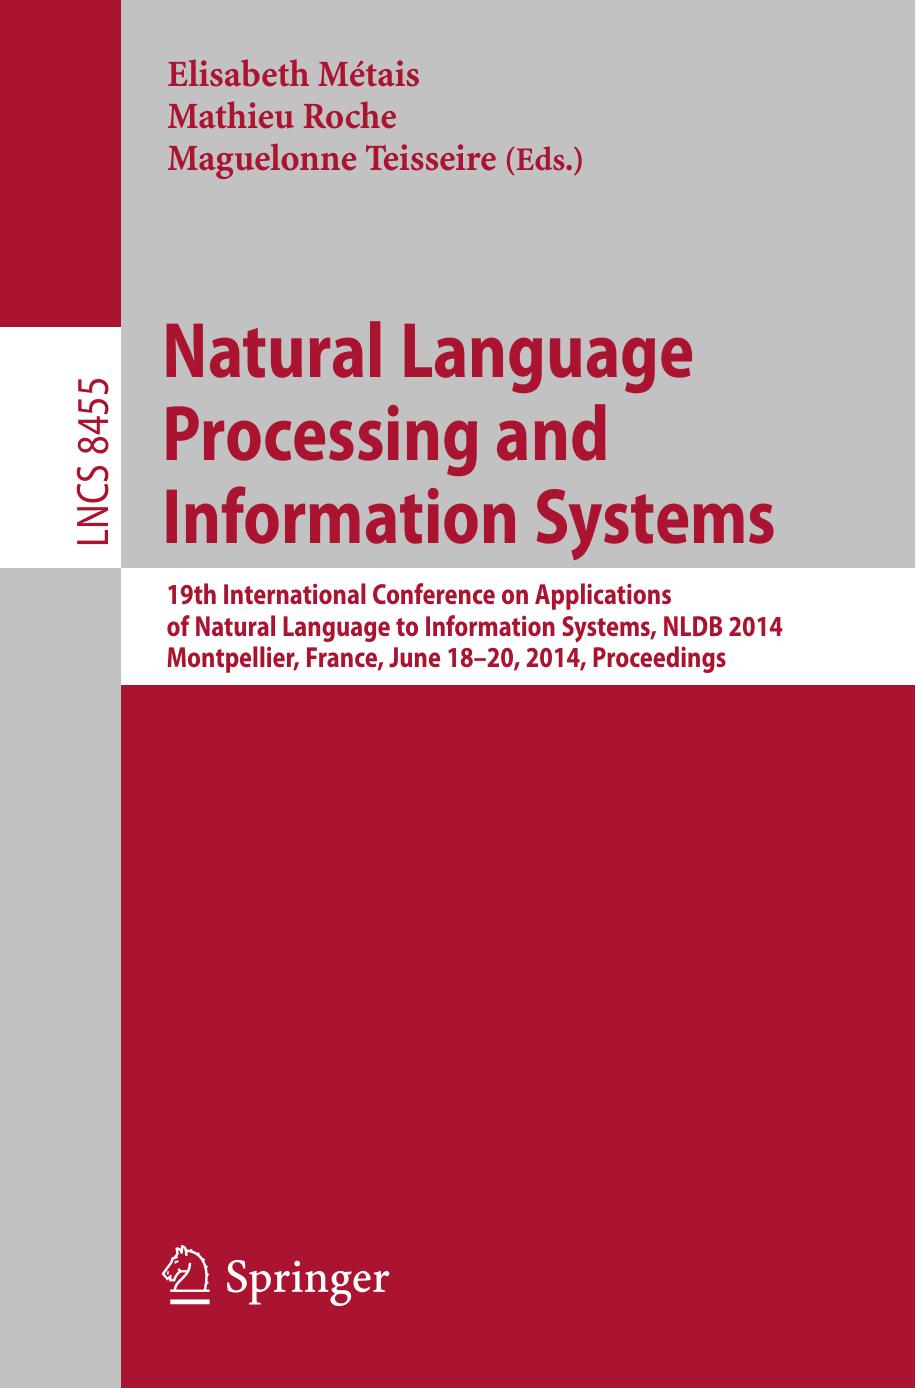 Natural Language Processing and Information Systems: 19th International Conference on Applications of Natural Language to Information Systems, NLDB 2014, Montpellier, France, June 18-20, 2014. Proceedings